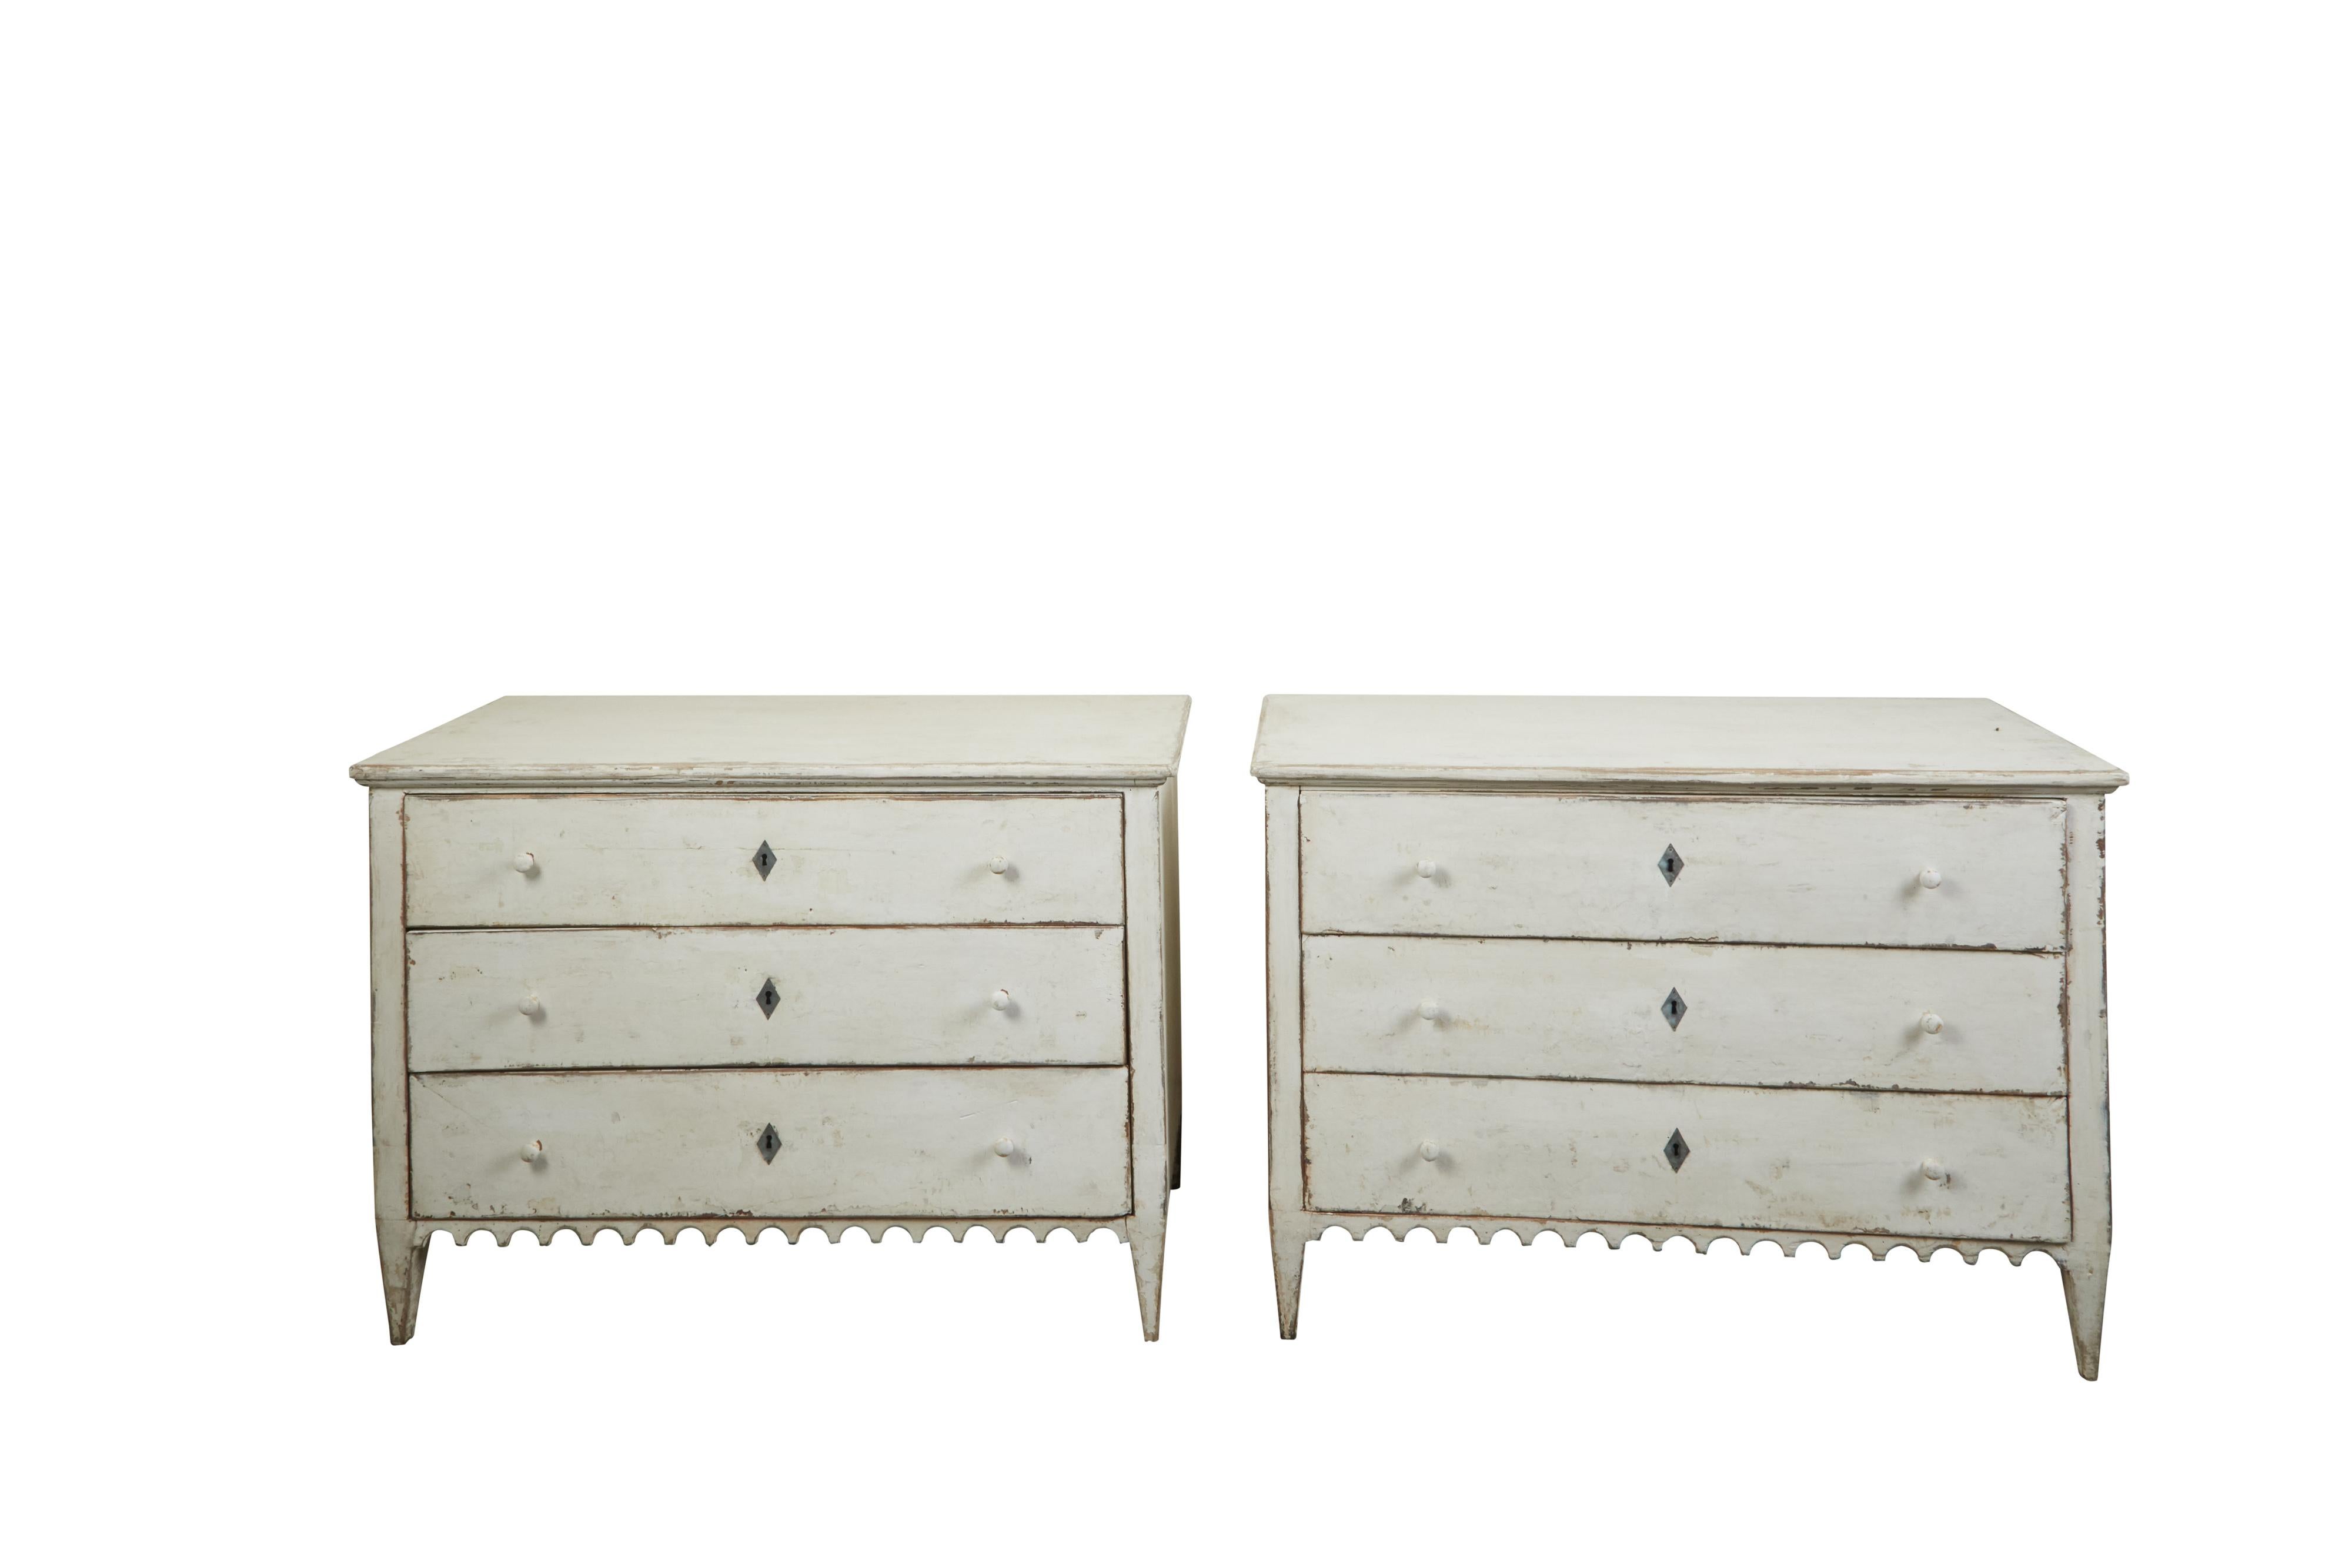 A pair of French three-drawer commodes from the late 19th century, with new paint and scalloped skirt. Created in France during the third quarter of the 19th century, each of this pair of painted commodes features a rectangular top sitting above a